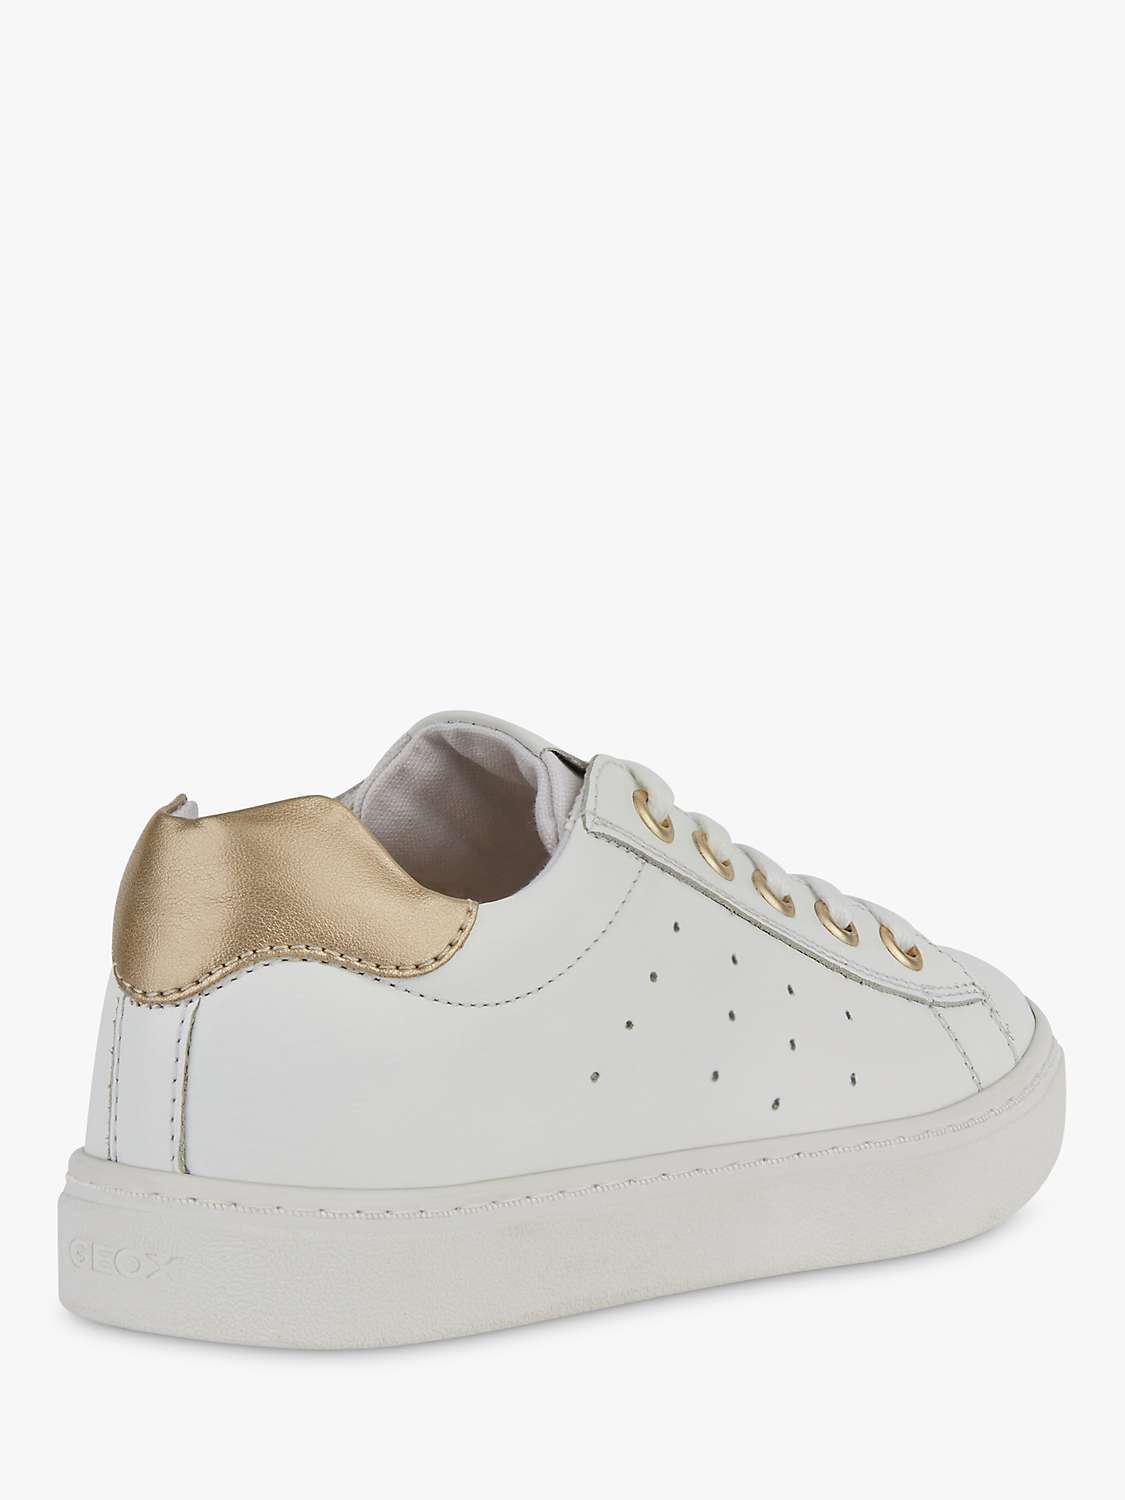 Buy Geox Kids' Nashik Leather Blend Lace Up Trainers, White/Gold Online at johnlewis.com